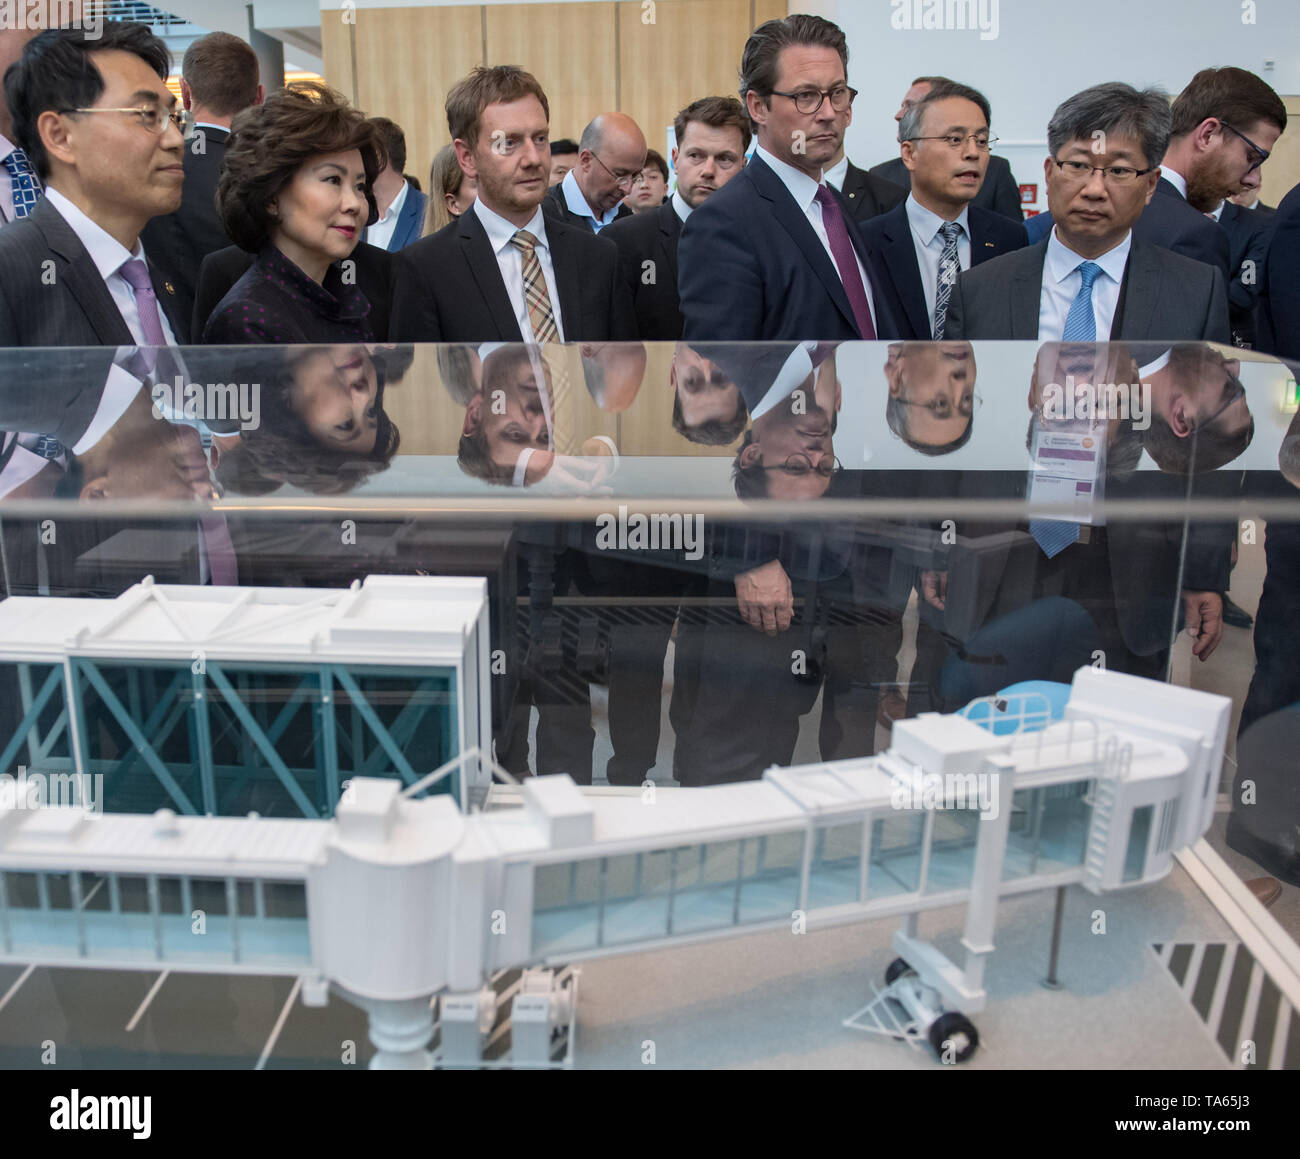 22 May 2019, Saxony, Leipzig: Jeong Ryeol Kim (l-r), Vice Minister in the Korean Ministry of Transport, Elaine L. Chao, Transport Minister of the USA, Michael Kretschmer (CDU), Prime Minister of Saxony, Andreas Scheuer (CSU), Federal Minister of Transport, and Young Tae Kim, Secretary General of the International Transport Forum (ITF), will look at the model of a gangway at the Korean stand during their tour of the International Transport Forum in Leipzig. Around 1300 scientists and politicians from 70 countries will discuss the mobility of the future at the International Transport Forum. This Stock Photo